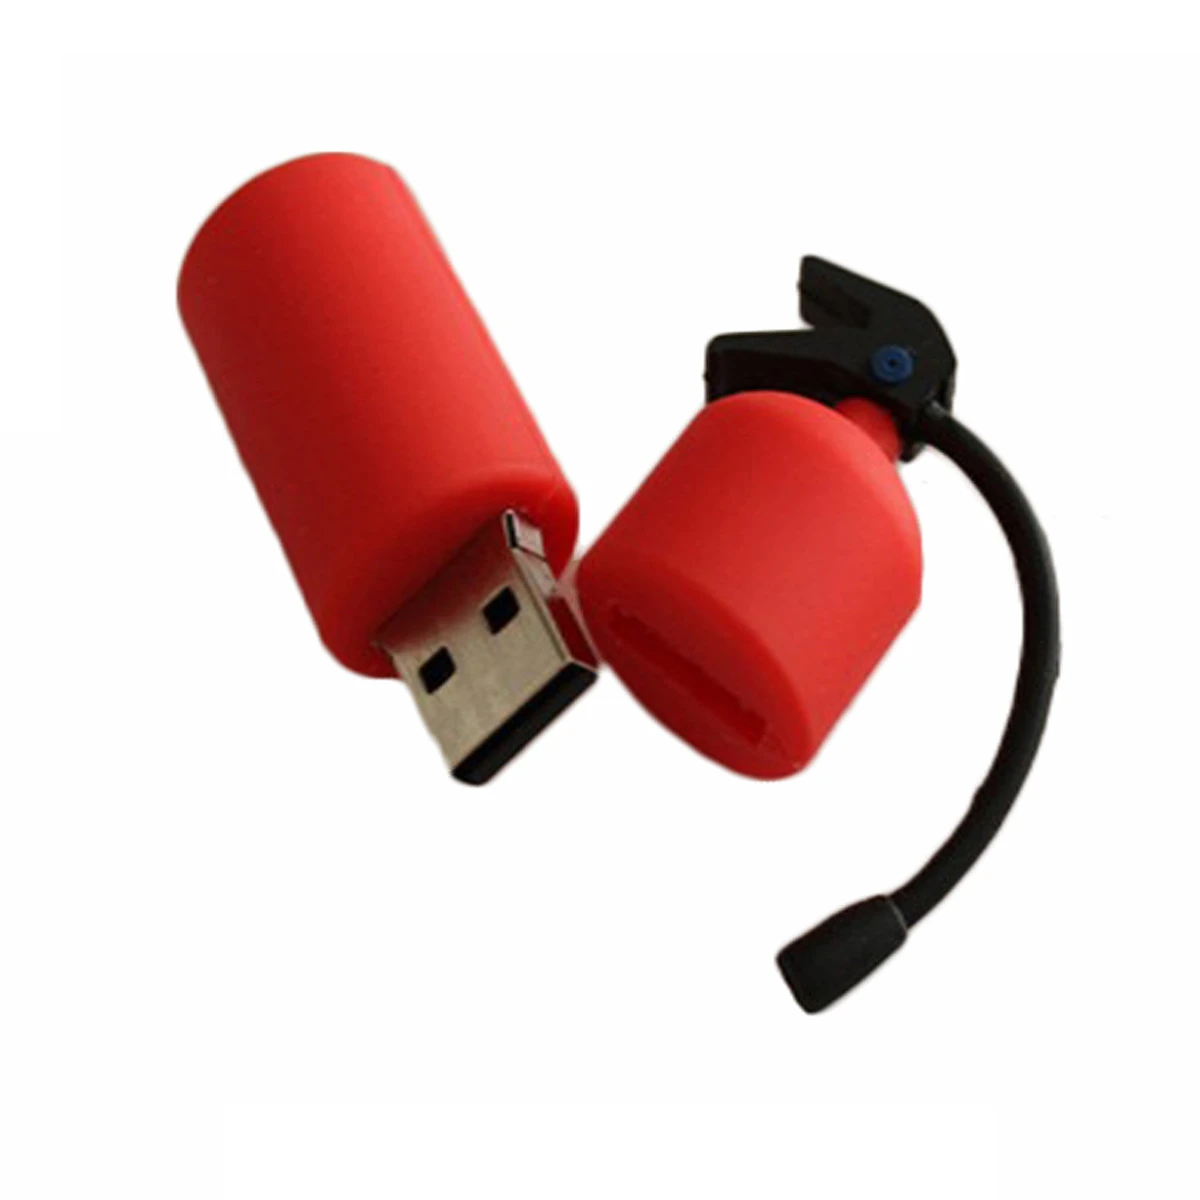 New fashion promotional usb flash drive At Good Price